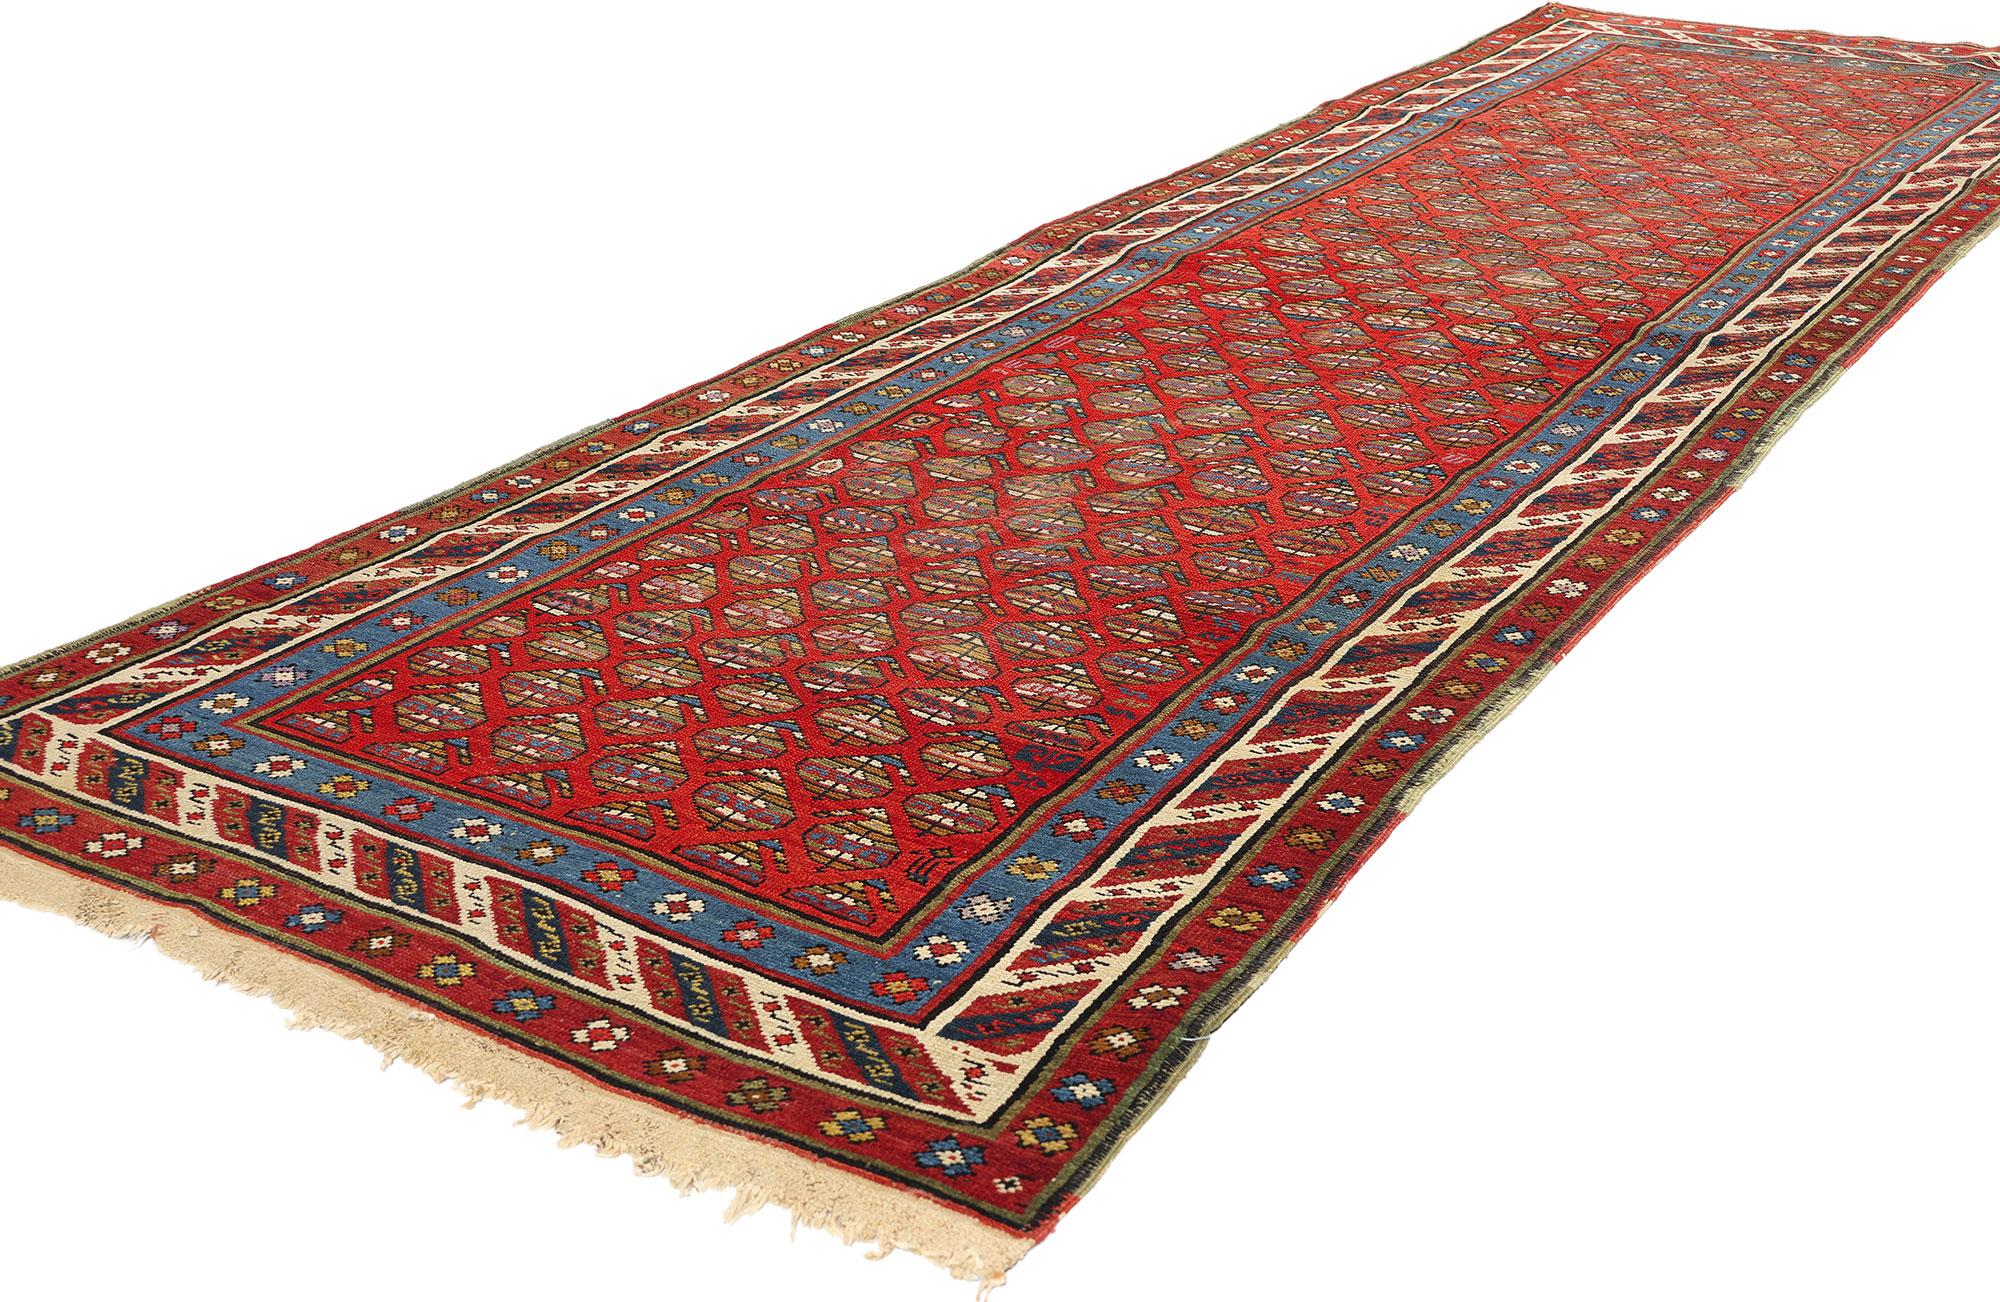 73231 Antique Caucasian Shirvan Rug Runner, 03'03 x 11'00. Caucasian Shirvan carpet runners originate from the Shirvan region nestled in the Caucasus Mountains, renowned for their vibrant hues, geometric designs, and intricate motifs. These